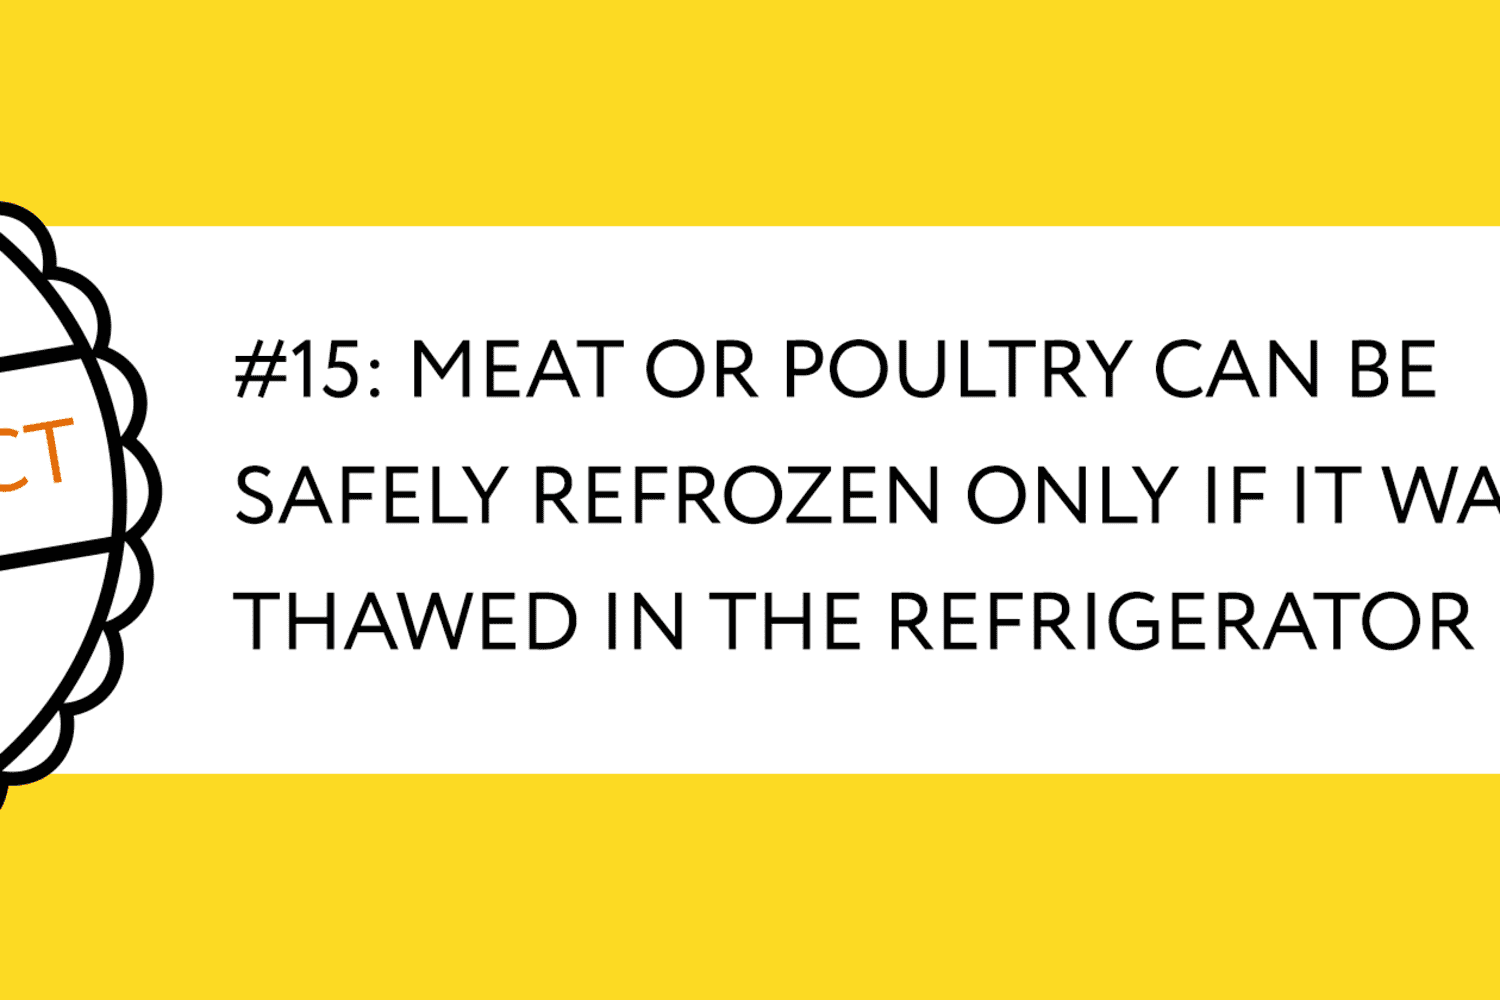 The Only Time You Can Safely Refreeze Meat or Poultry | The Kitchn